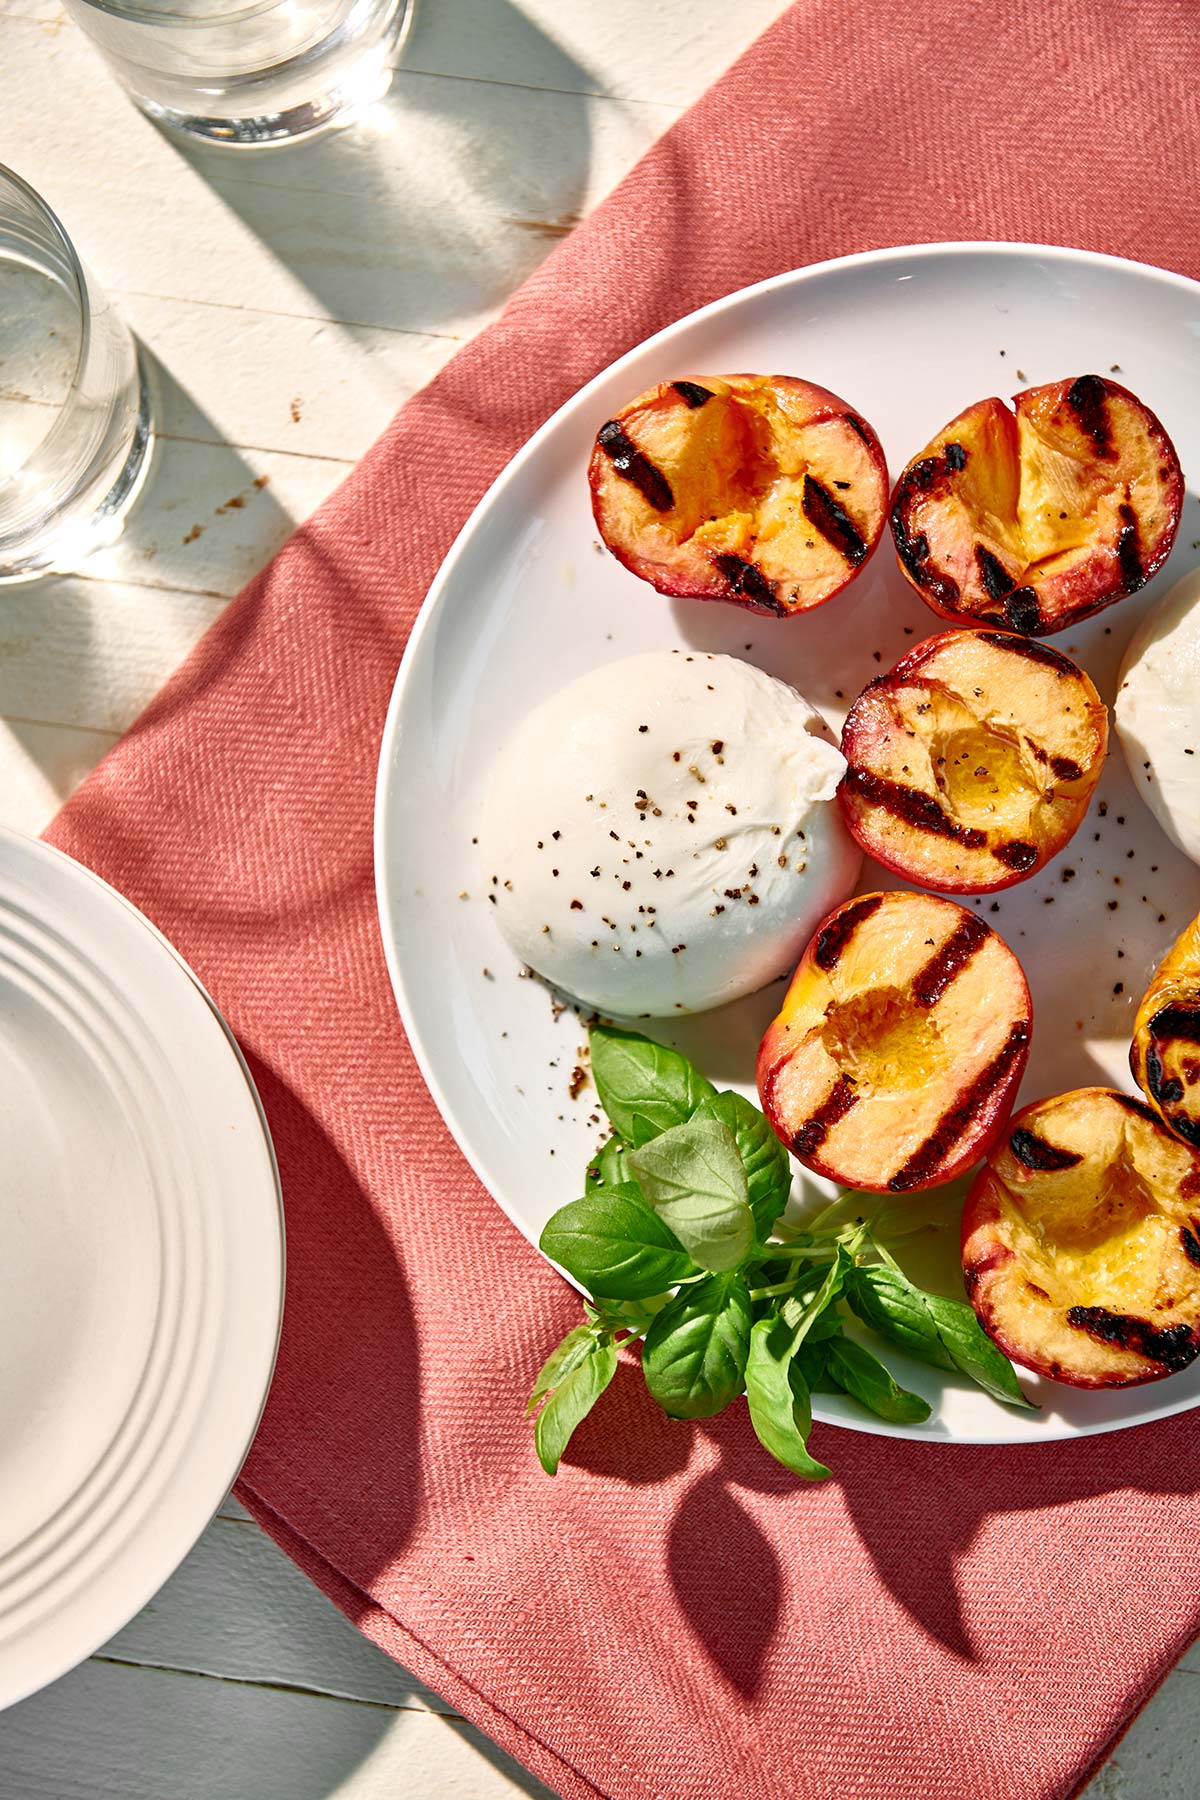 Mound of burrata cheese with grilled peaches on picnic plate.